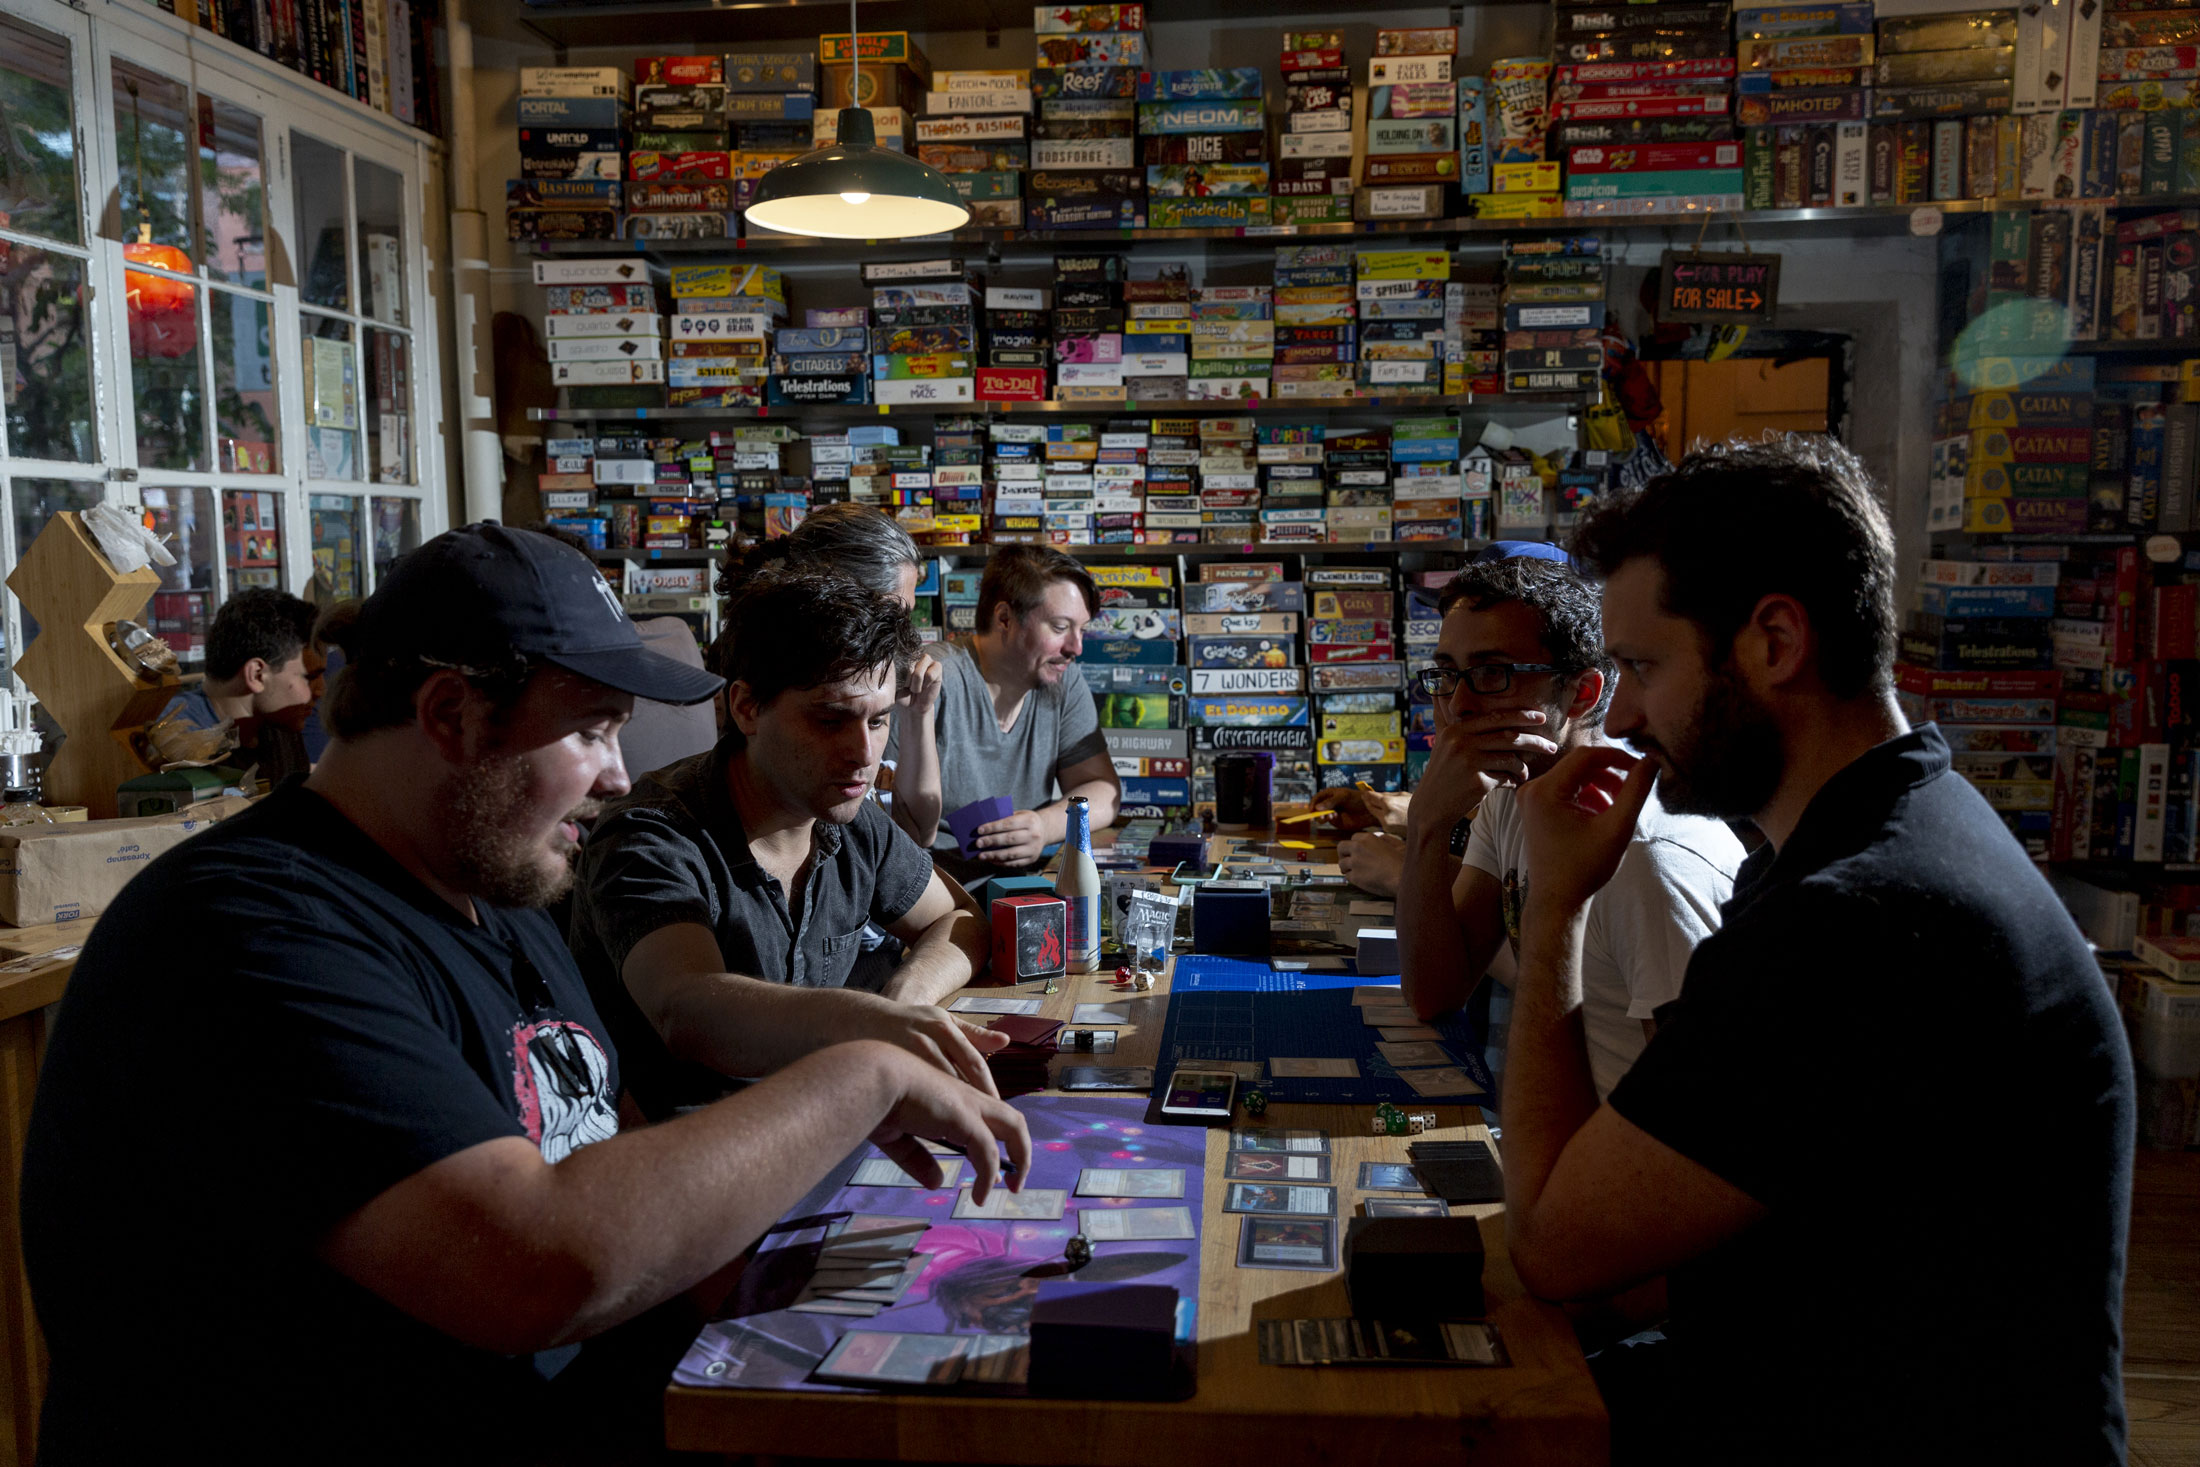 Participants play Magic: The Gathering card game in New York.